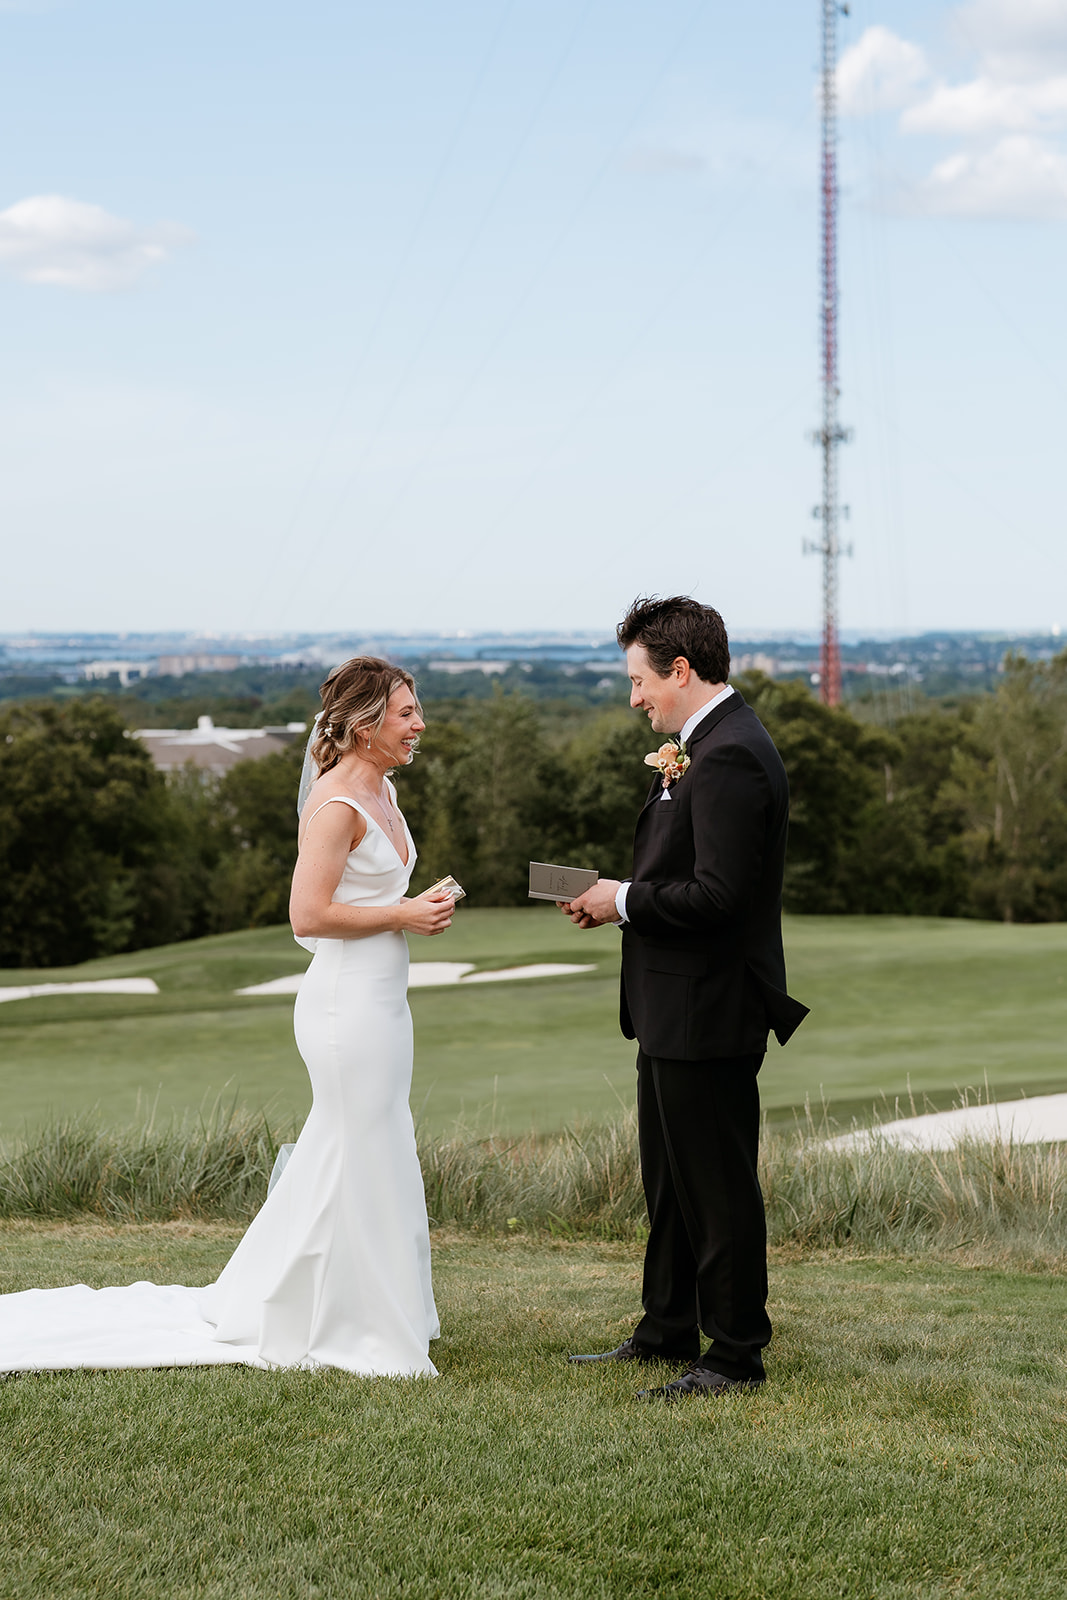 Bride and groom reading their vows to each other on a hill